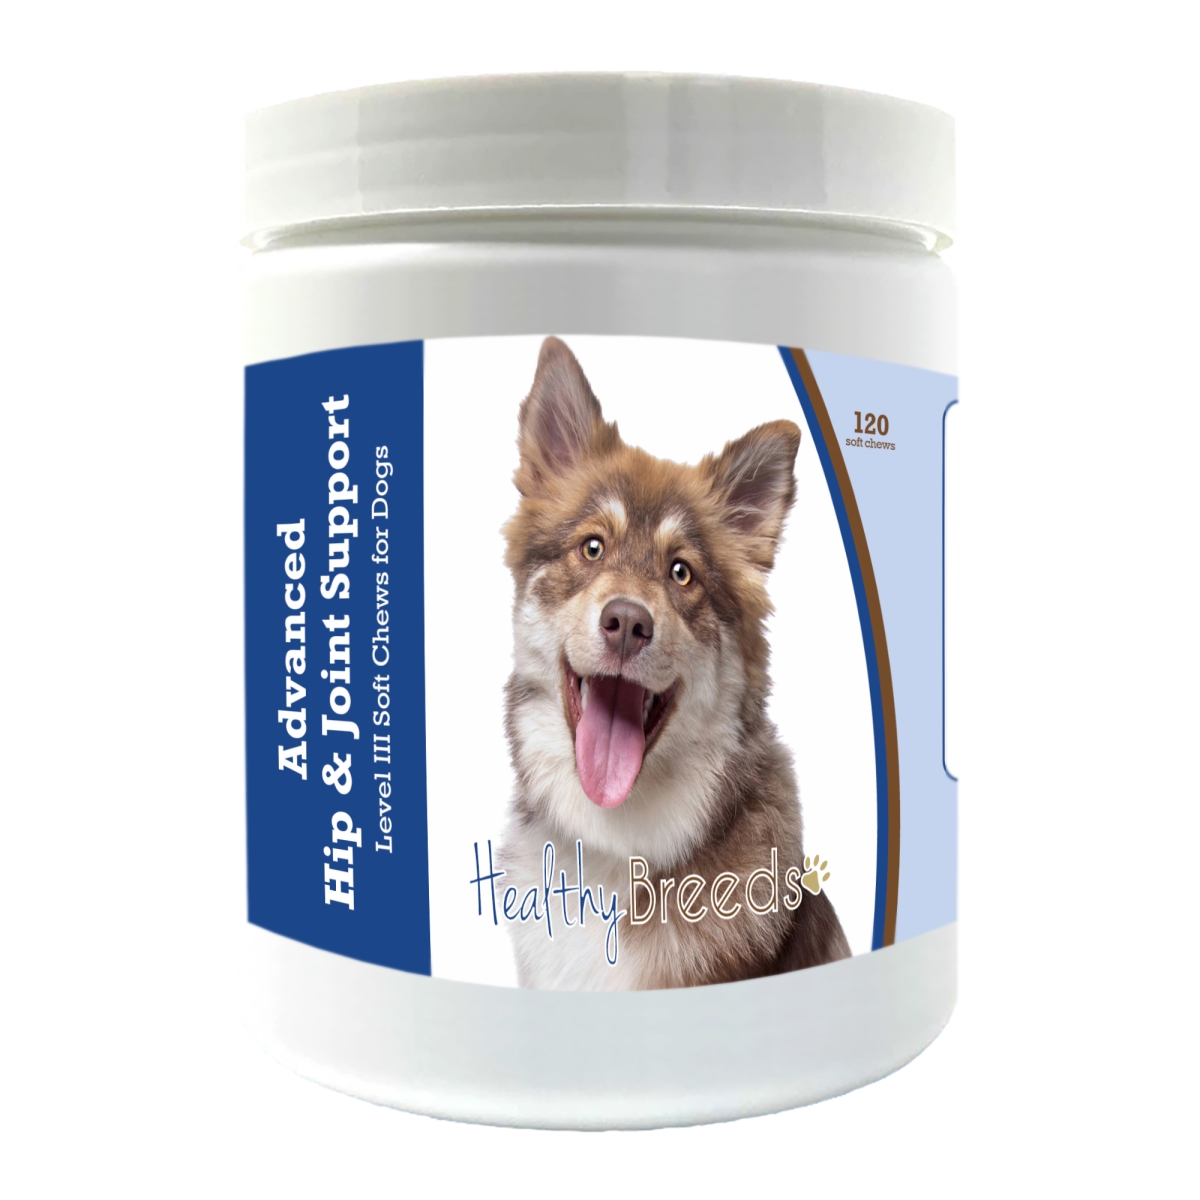 Picture of Healthy Breeds 192959898255 Finnish Lapphund Advanced Hip & Joint Support Level III Soft Chews for Dogs